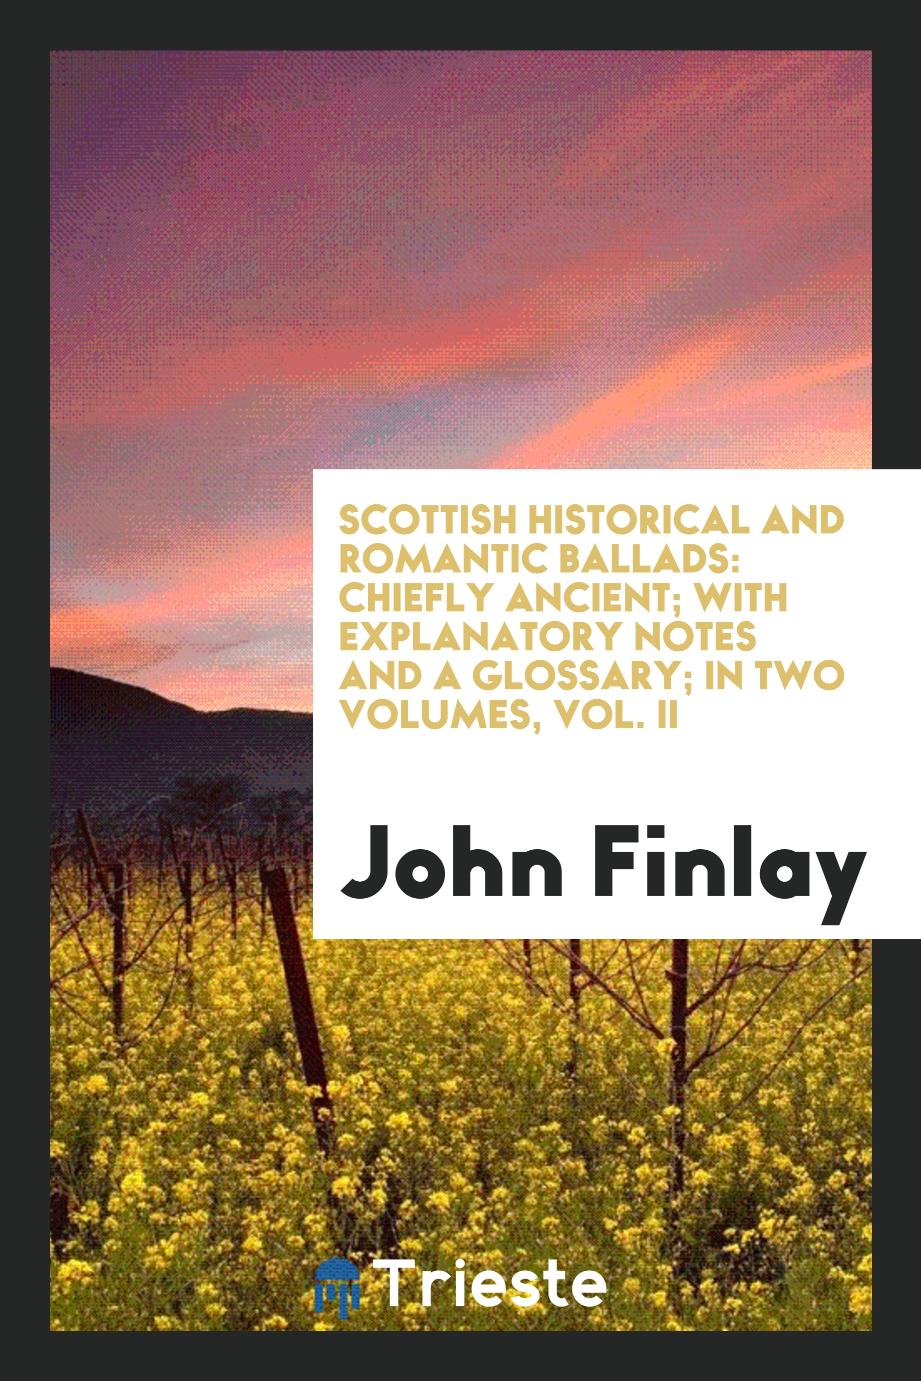 Scottish Historical and Romantic Ballads: Chiefly Ancient; with Explanatory Notes and a Glossary; In Two Volumes, Vol. II